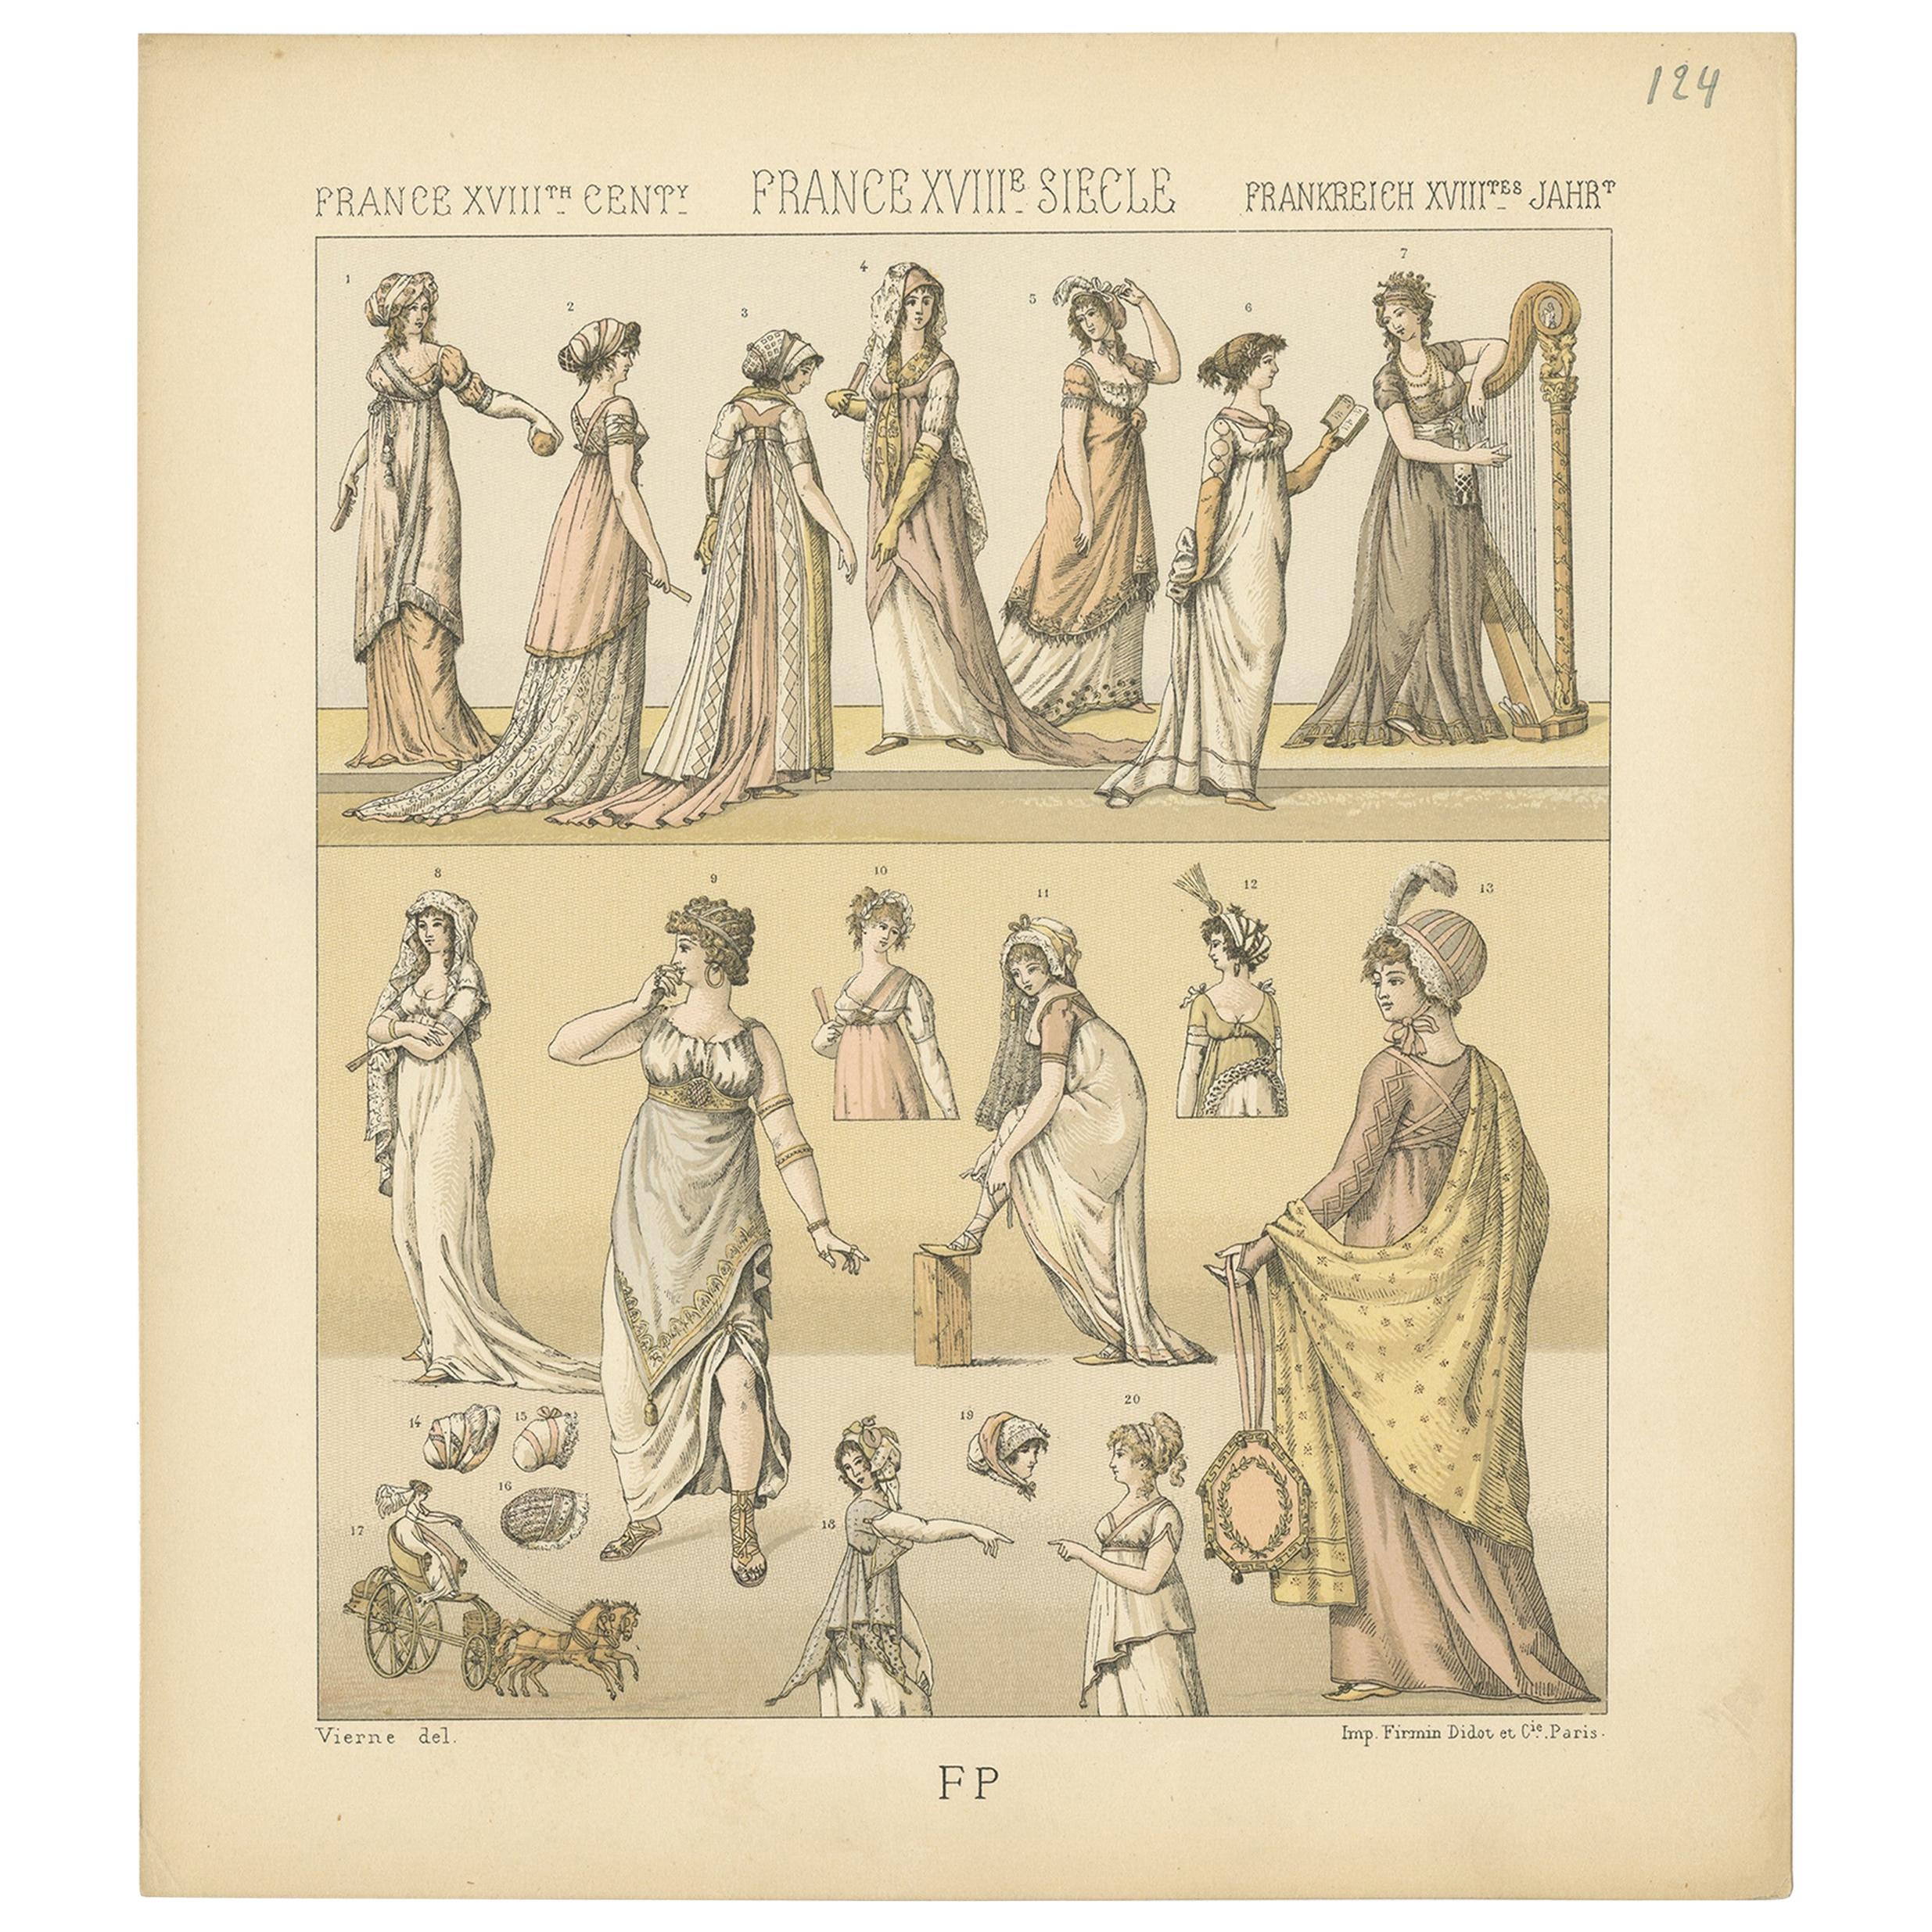 Pl. 124 Antique Print of French 18th Century Women's Costumes by Racinet